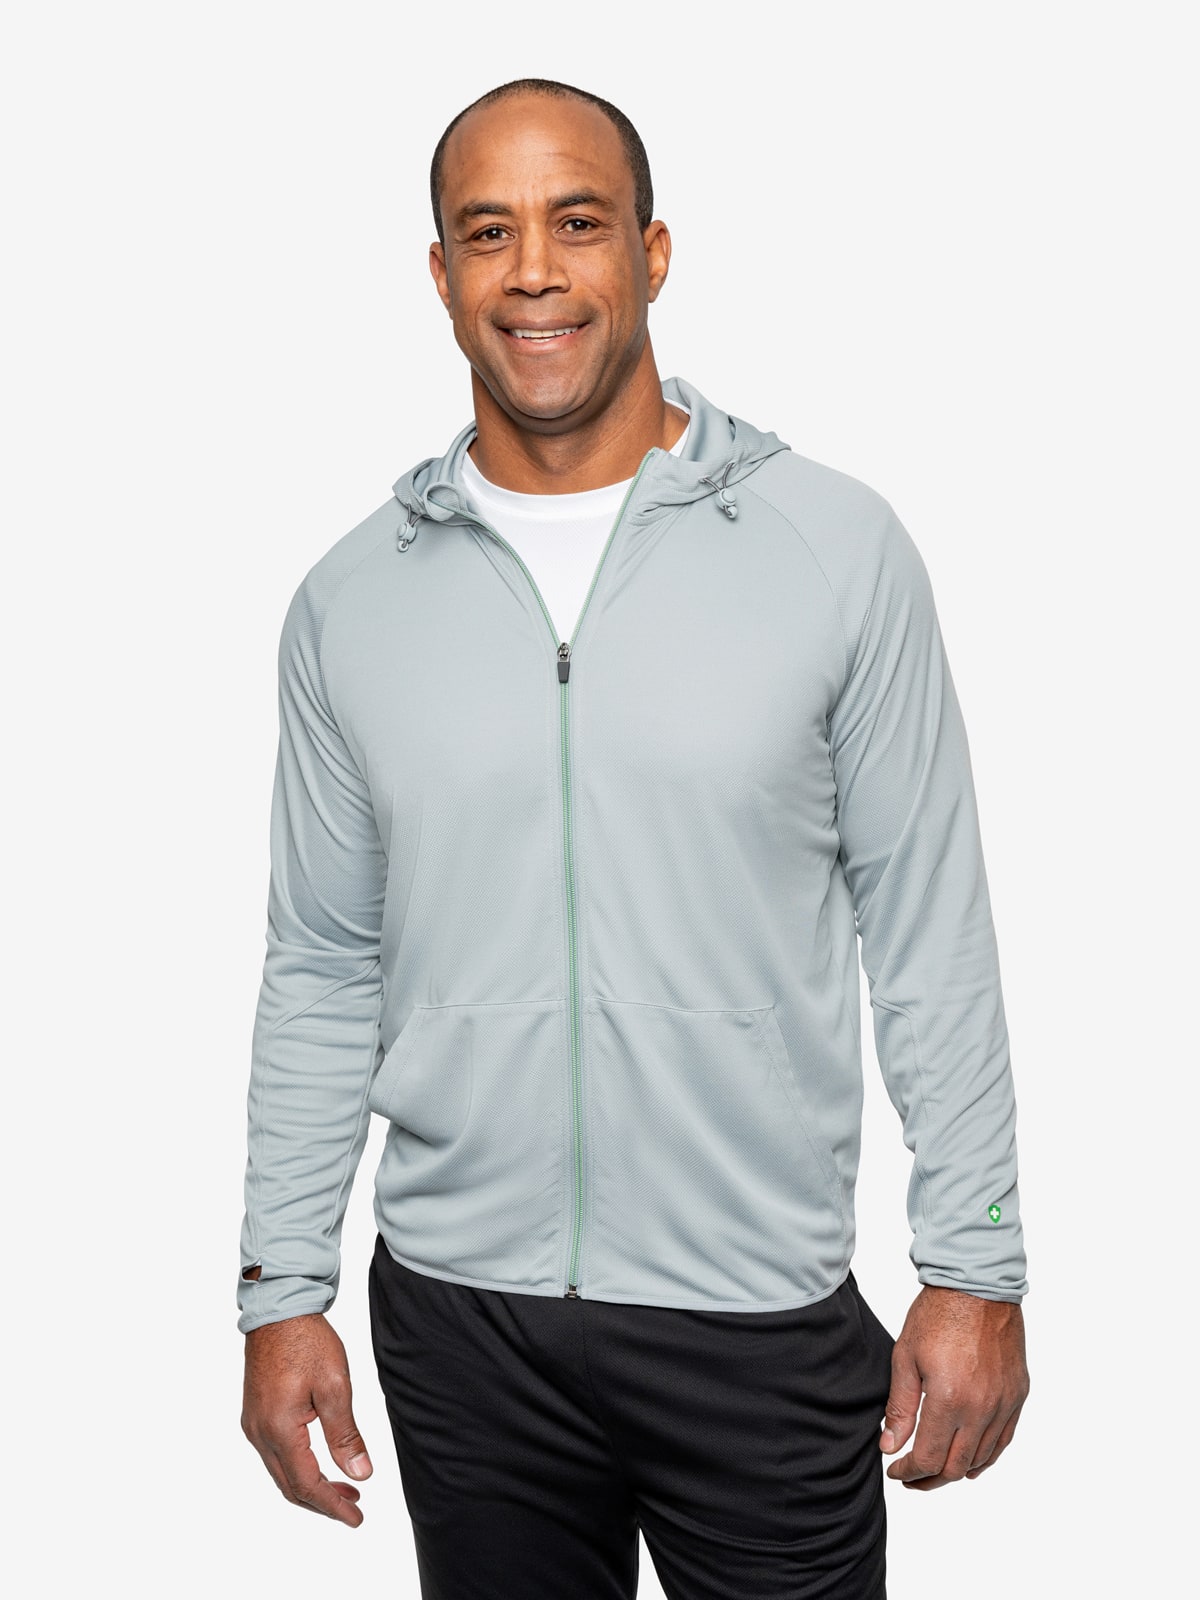 Insect Shield Men's Sport Mesh Hoodie